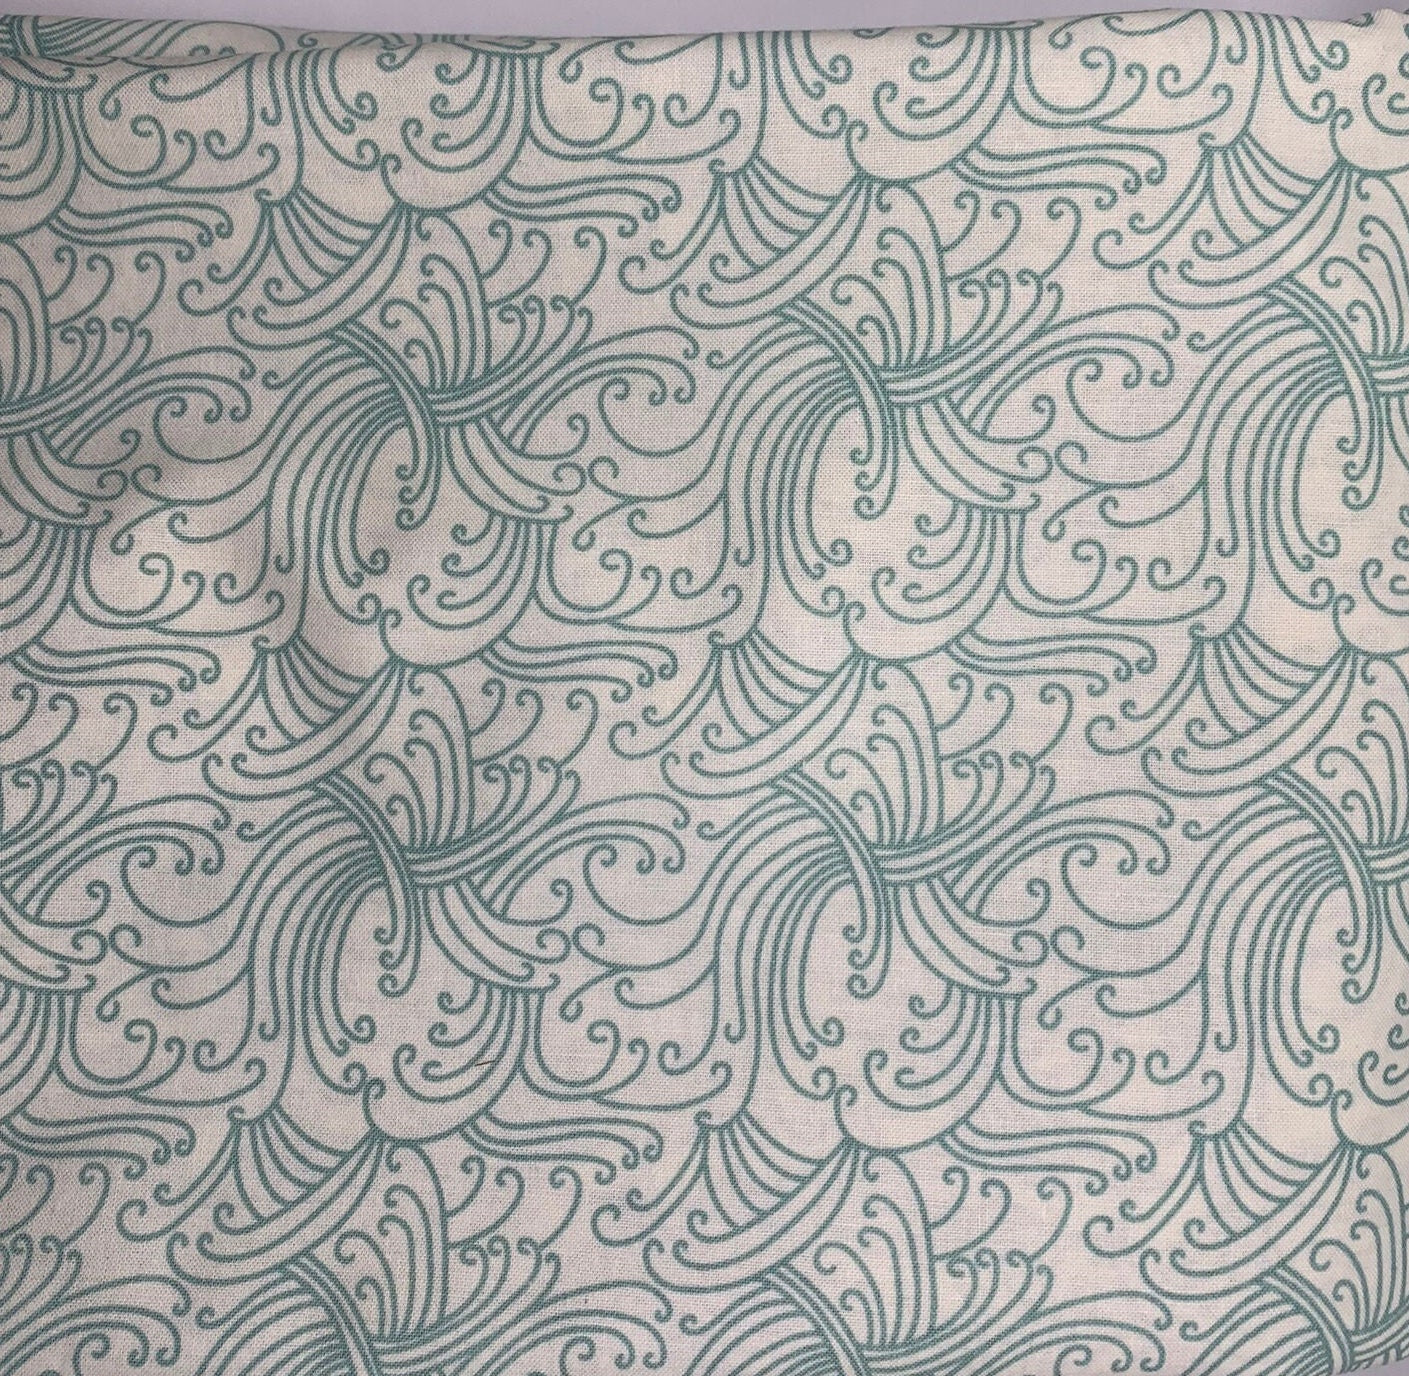 High Quality Quilt Fabric-Sold by the Yard-Riley Blake Designs-Riptide-Teal-100% Cotton Fabric